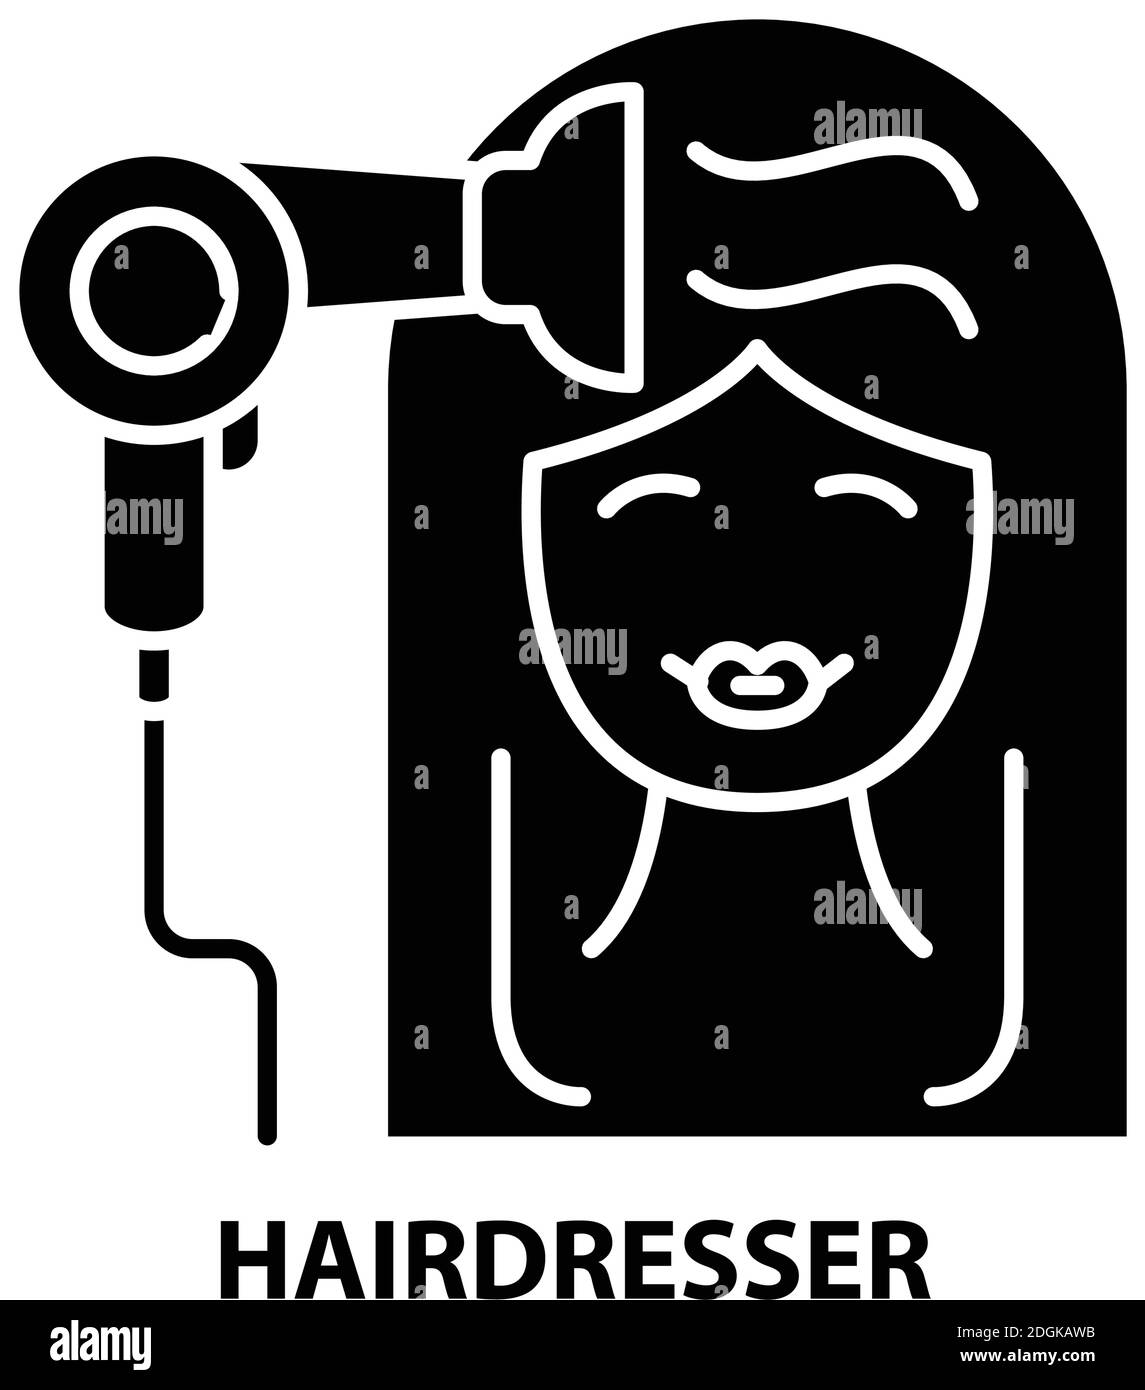 hairdresser icon, black vector sign with editable strokes, concept illustration Stock Vector